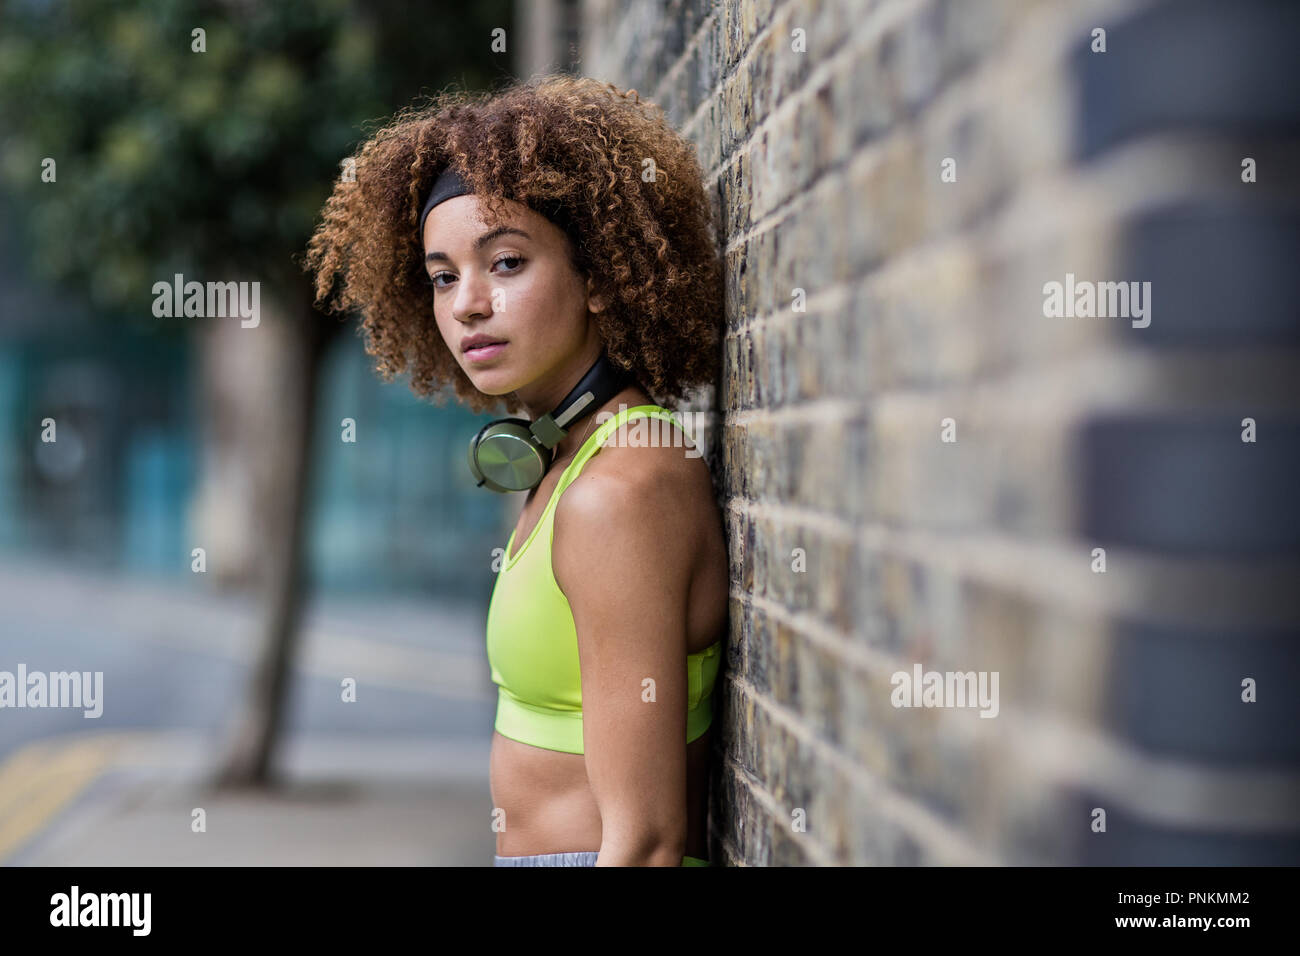 Portrait of athletic young adult female Stock Photo